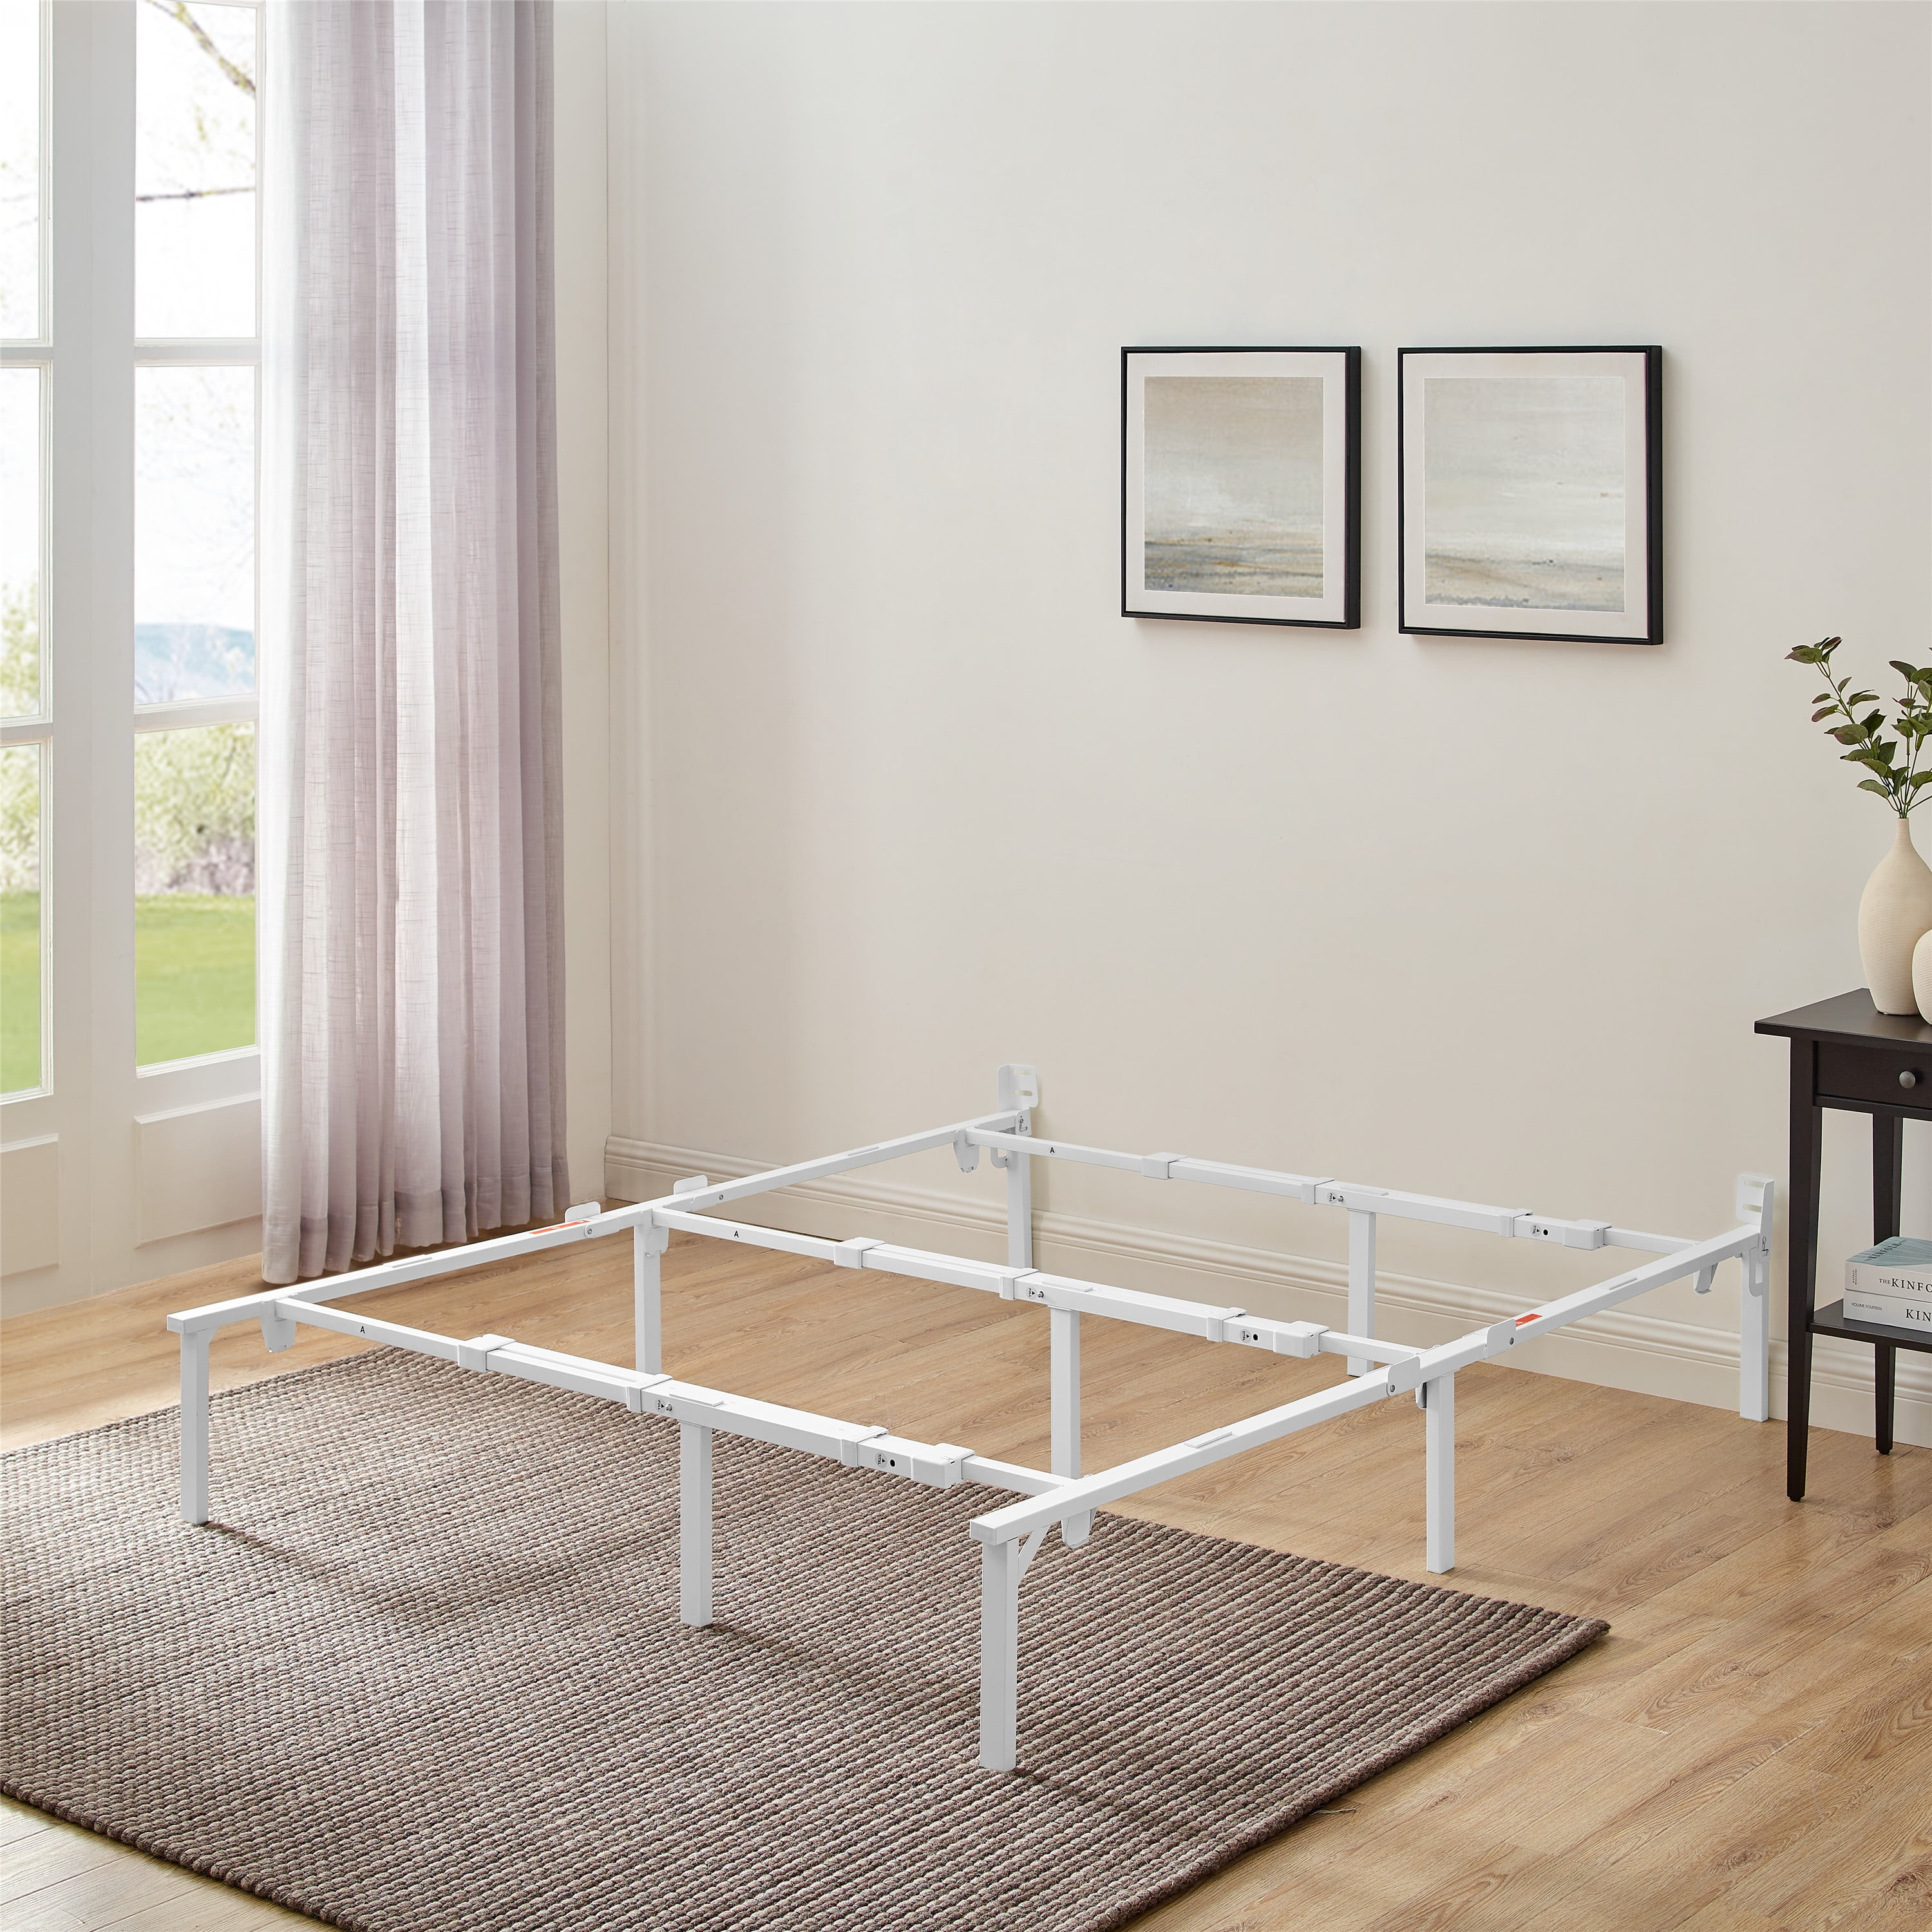 Height 3 Integrated Feet Universal Bed Centre Support Rail Adjustable Length 